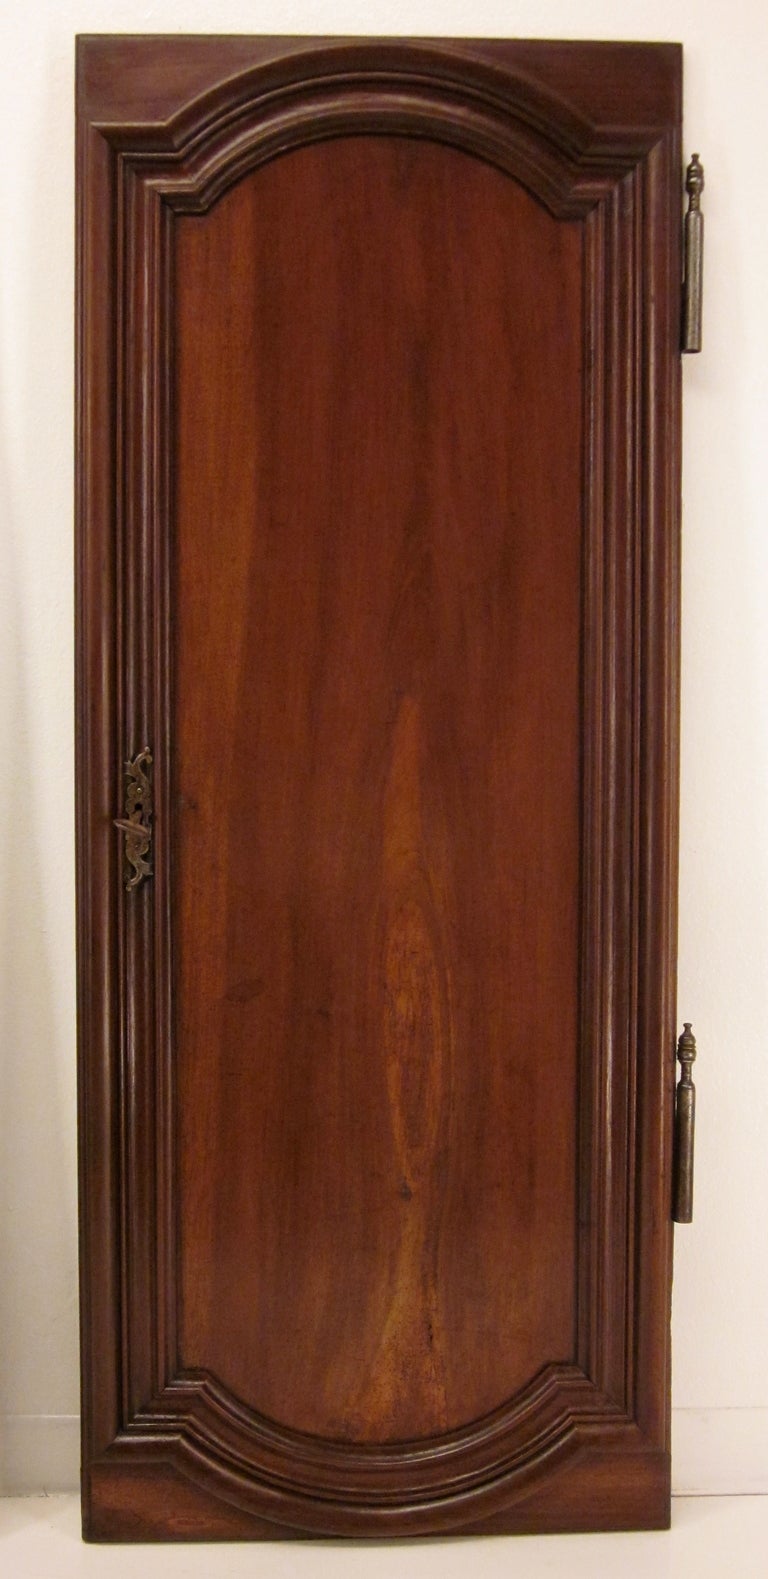 A pair of French Louis XIV style solid walnut doors with matching panels and thick molding. These doors were part of an armoire and have the original hardware hinges, lock and key. Waxed finish. 
More photos available upon request. We have a large